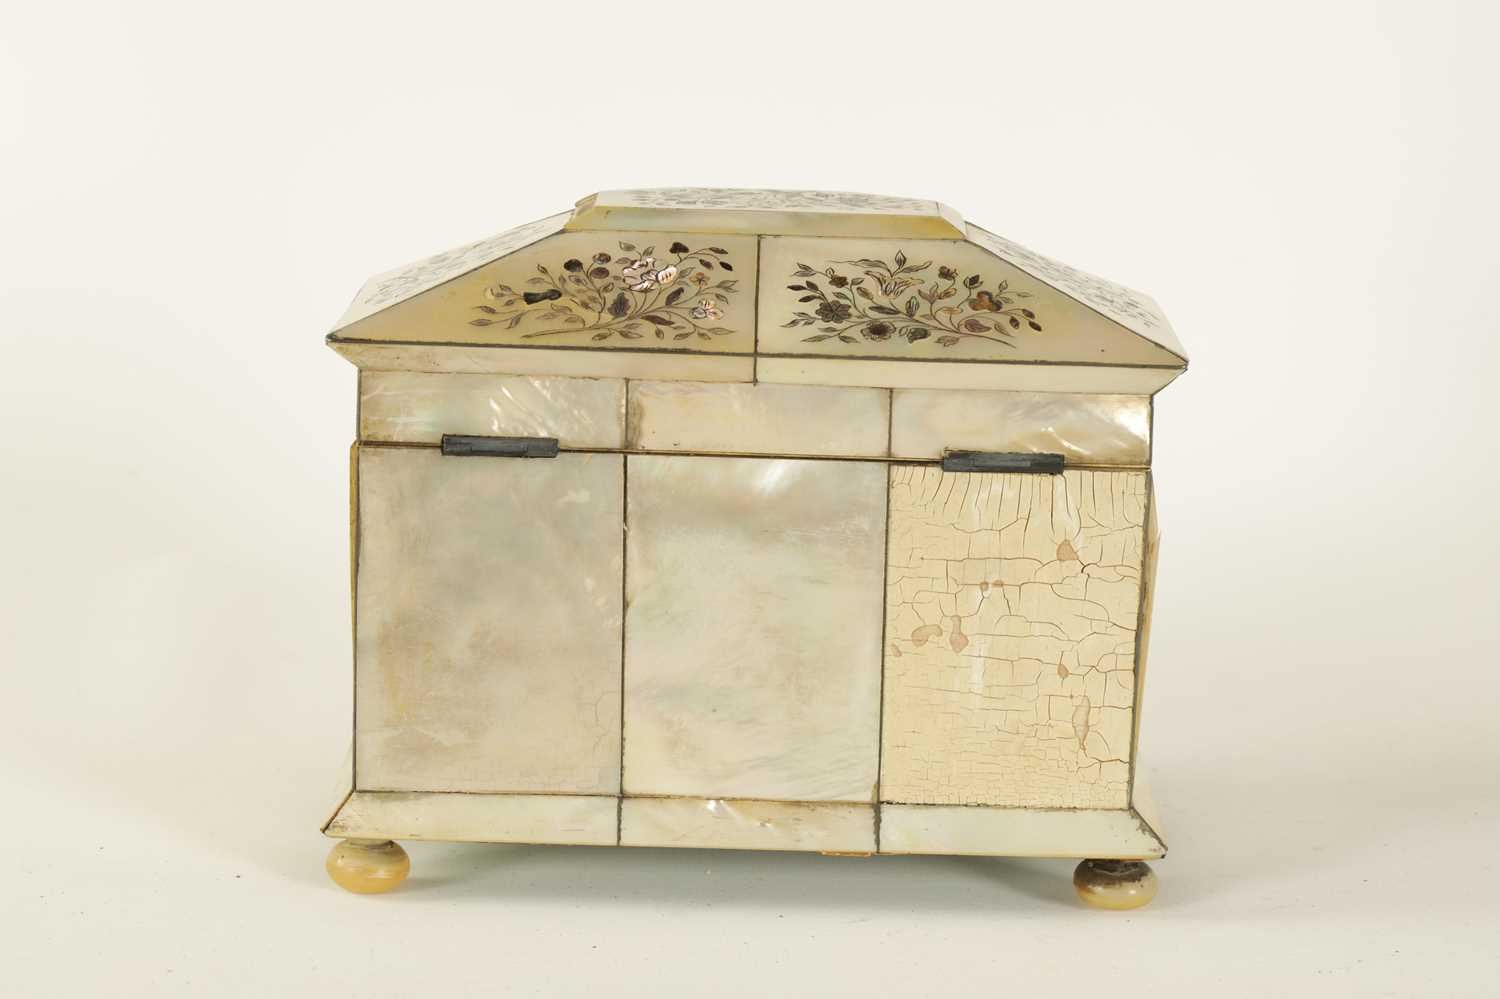 A 19TH CENTURY INLAID MOTHER OF PEARL TEA CADDY WITH CANTED ANGLED FRONT - Image 9 of 10